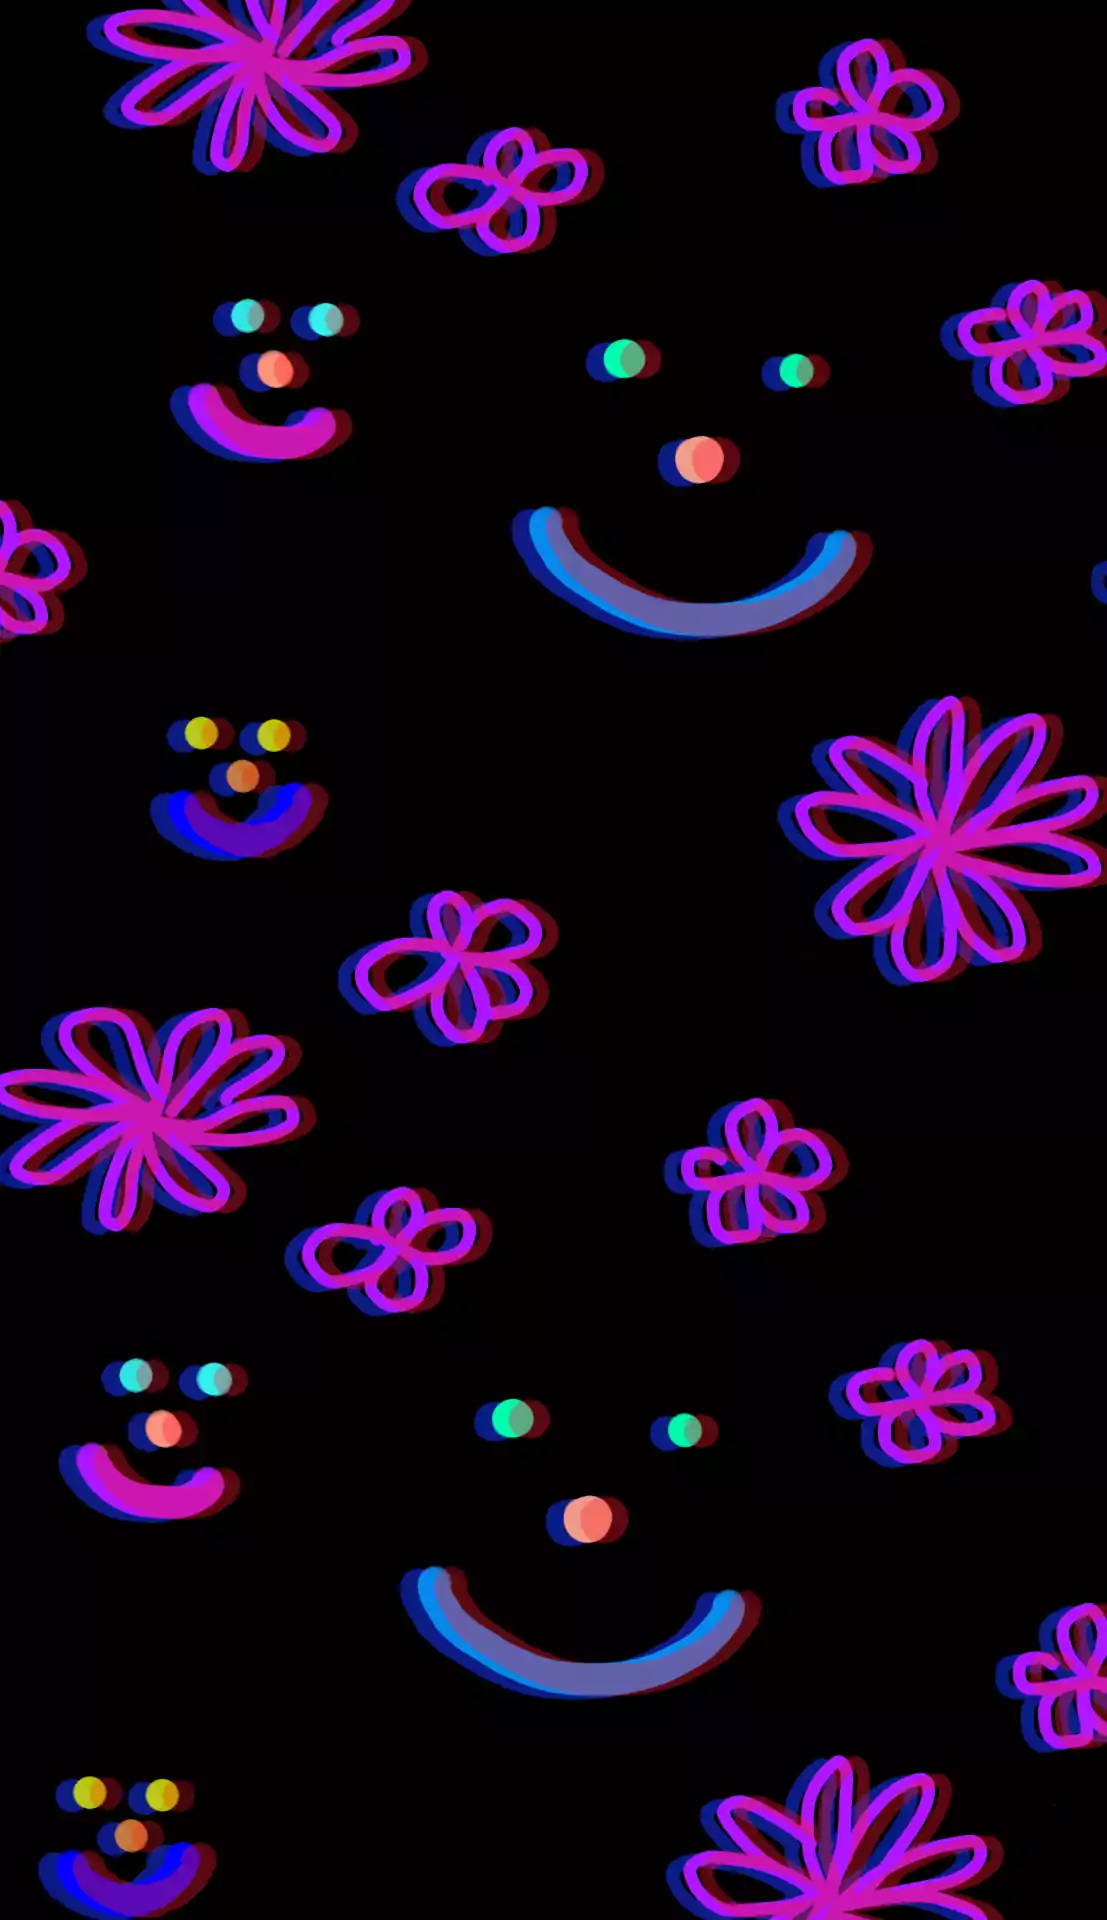 Weirdcore Flowers And Smileys Wallpaper